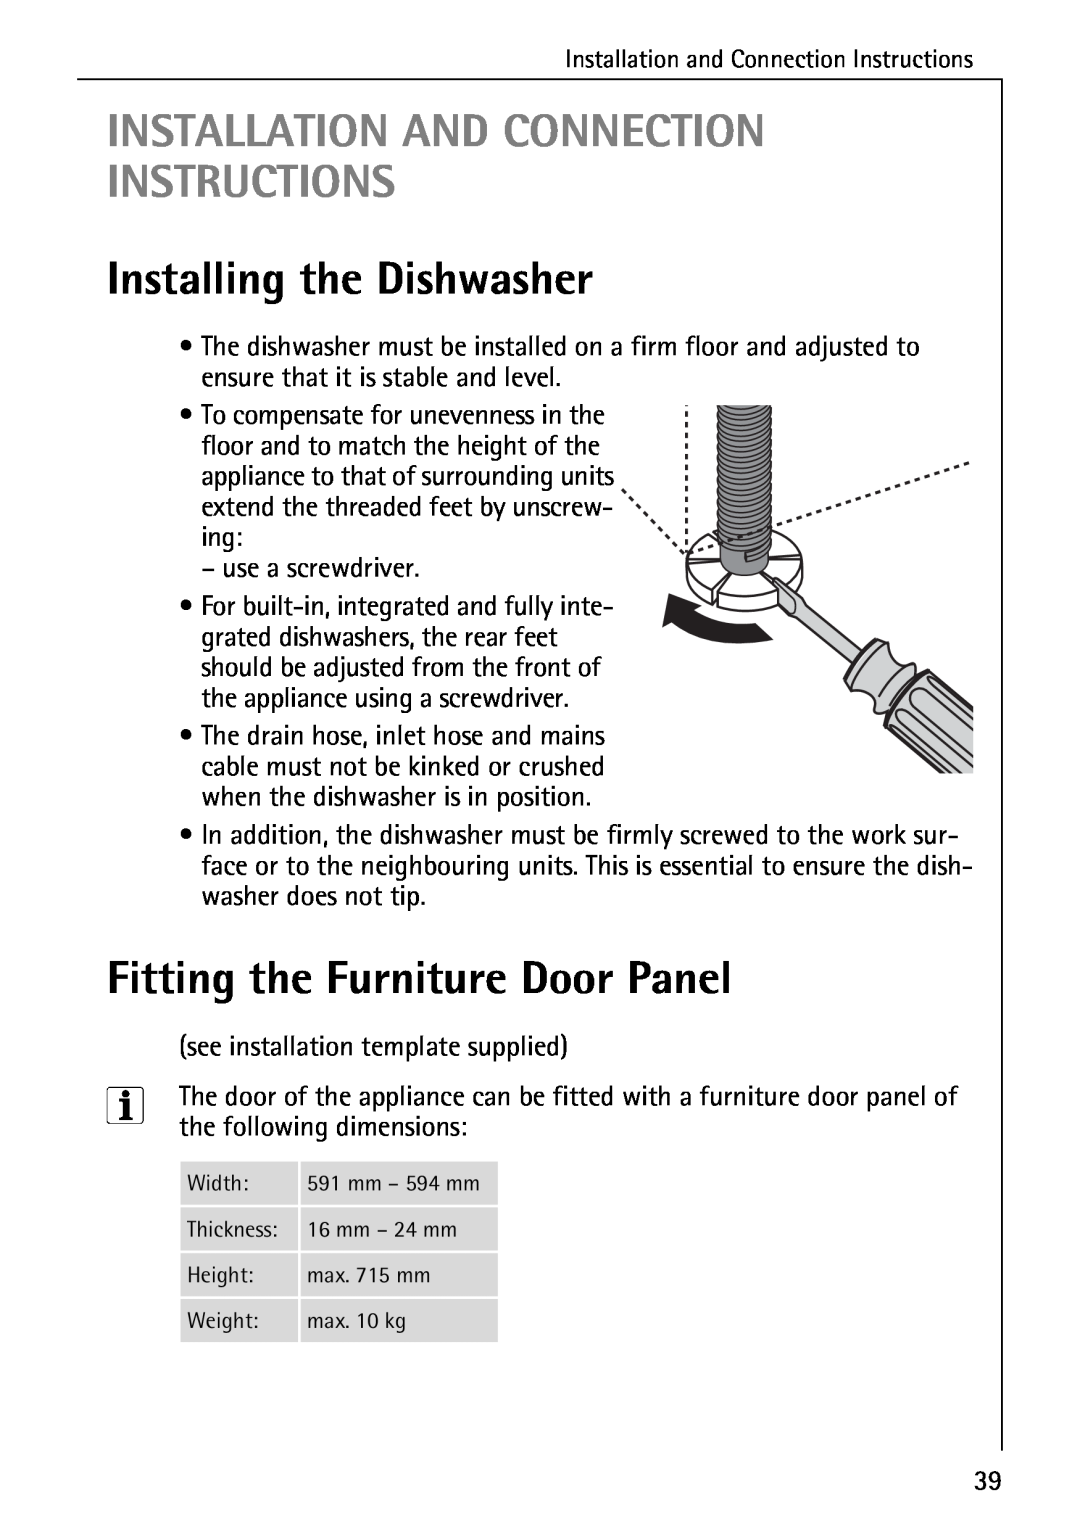 Electrolux 85050 VI Installation And Connection Instructions, Installing the Dishwasher, Fitting the Furniture Door Panel 